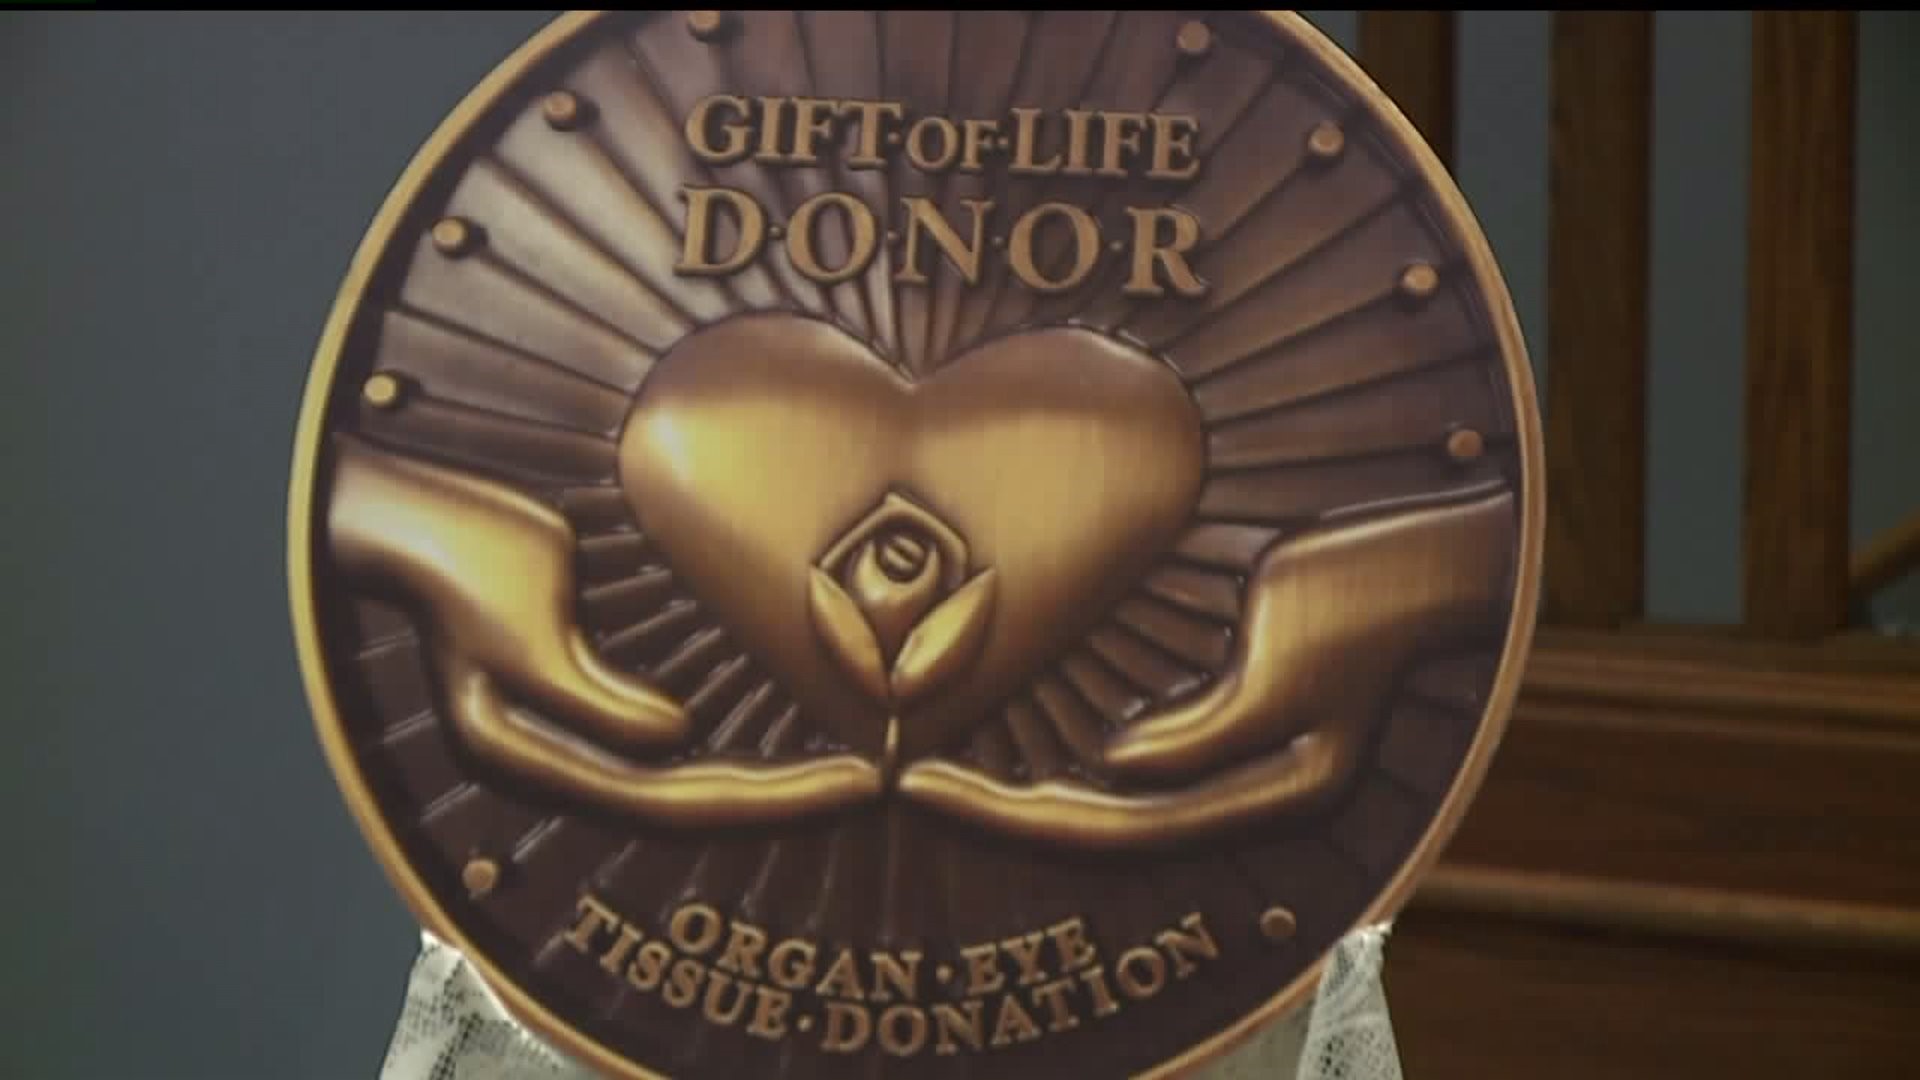 Gift of Life Donor Program holds annual ‘Life & Legacy’ celebration in